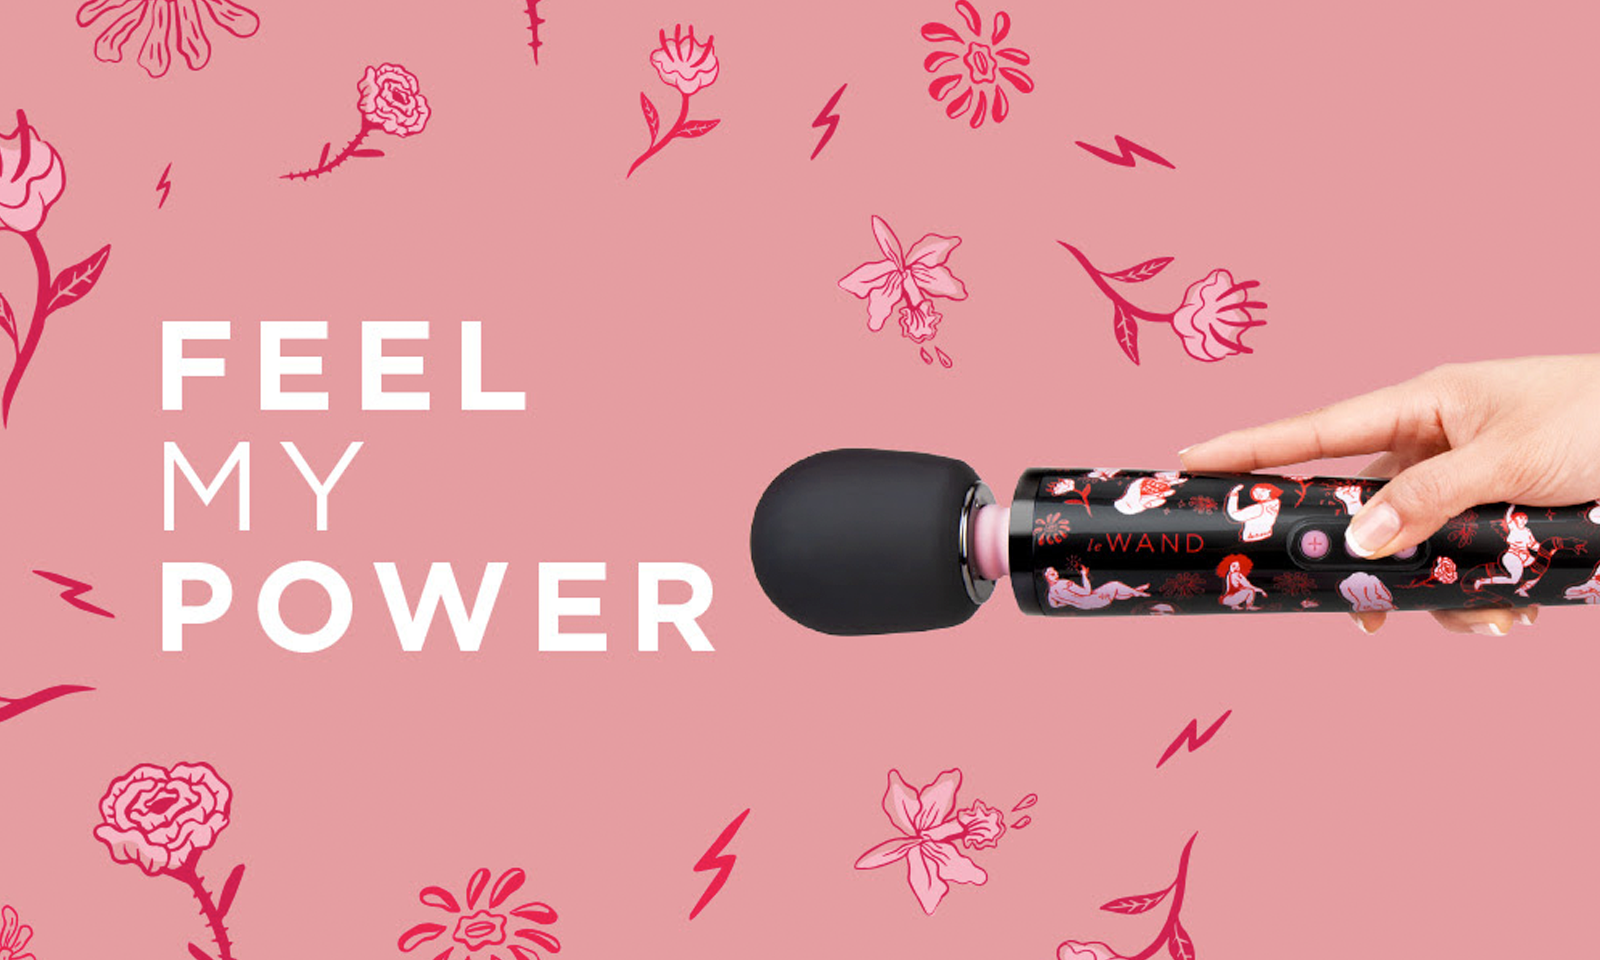 Le Wand Launches Feel My Power Campaign, Limited-Edition Vibe